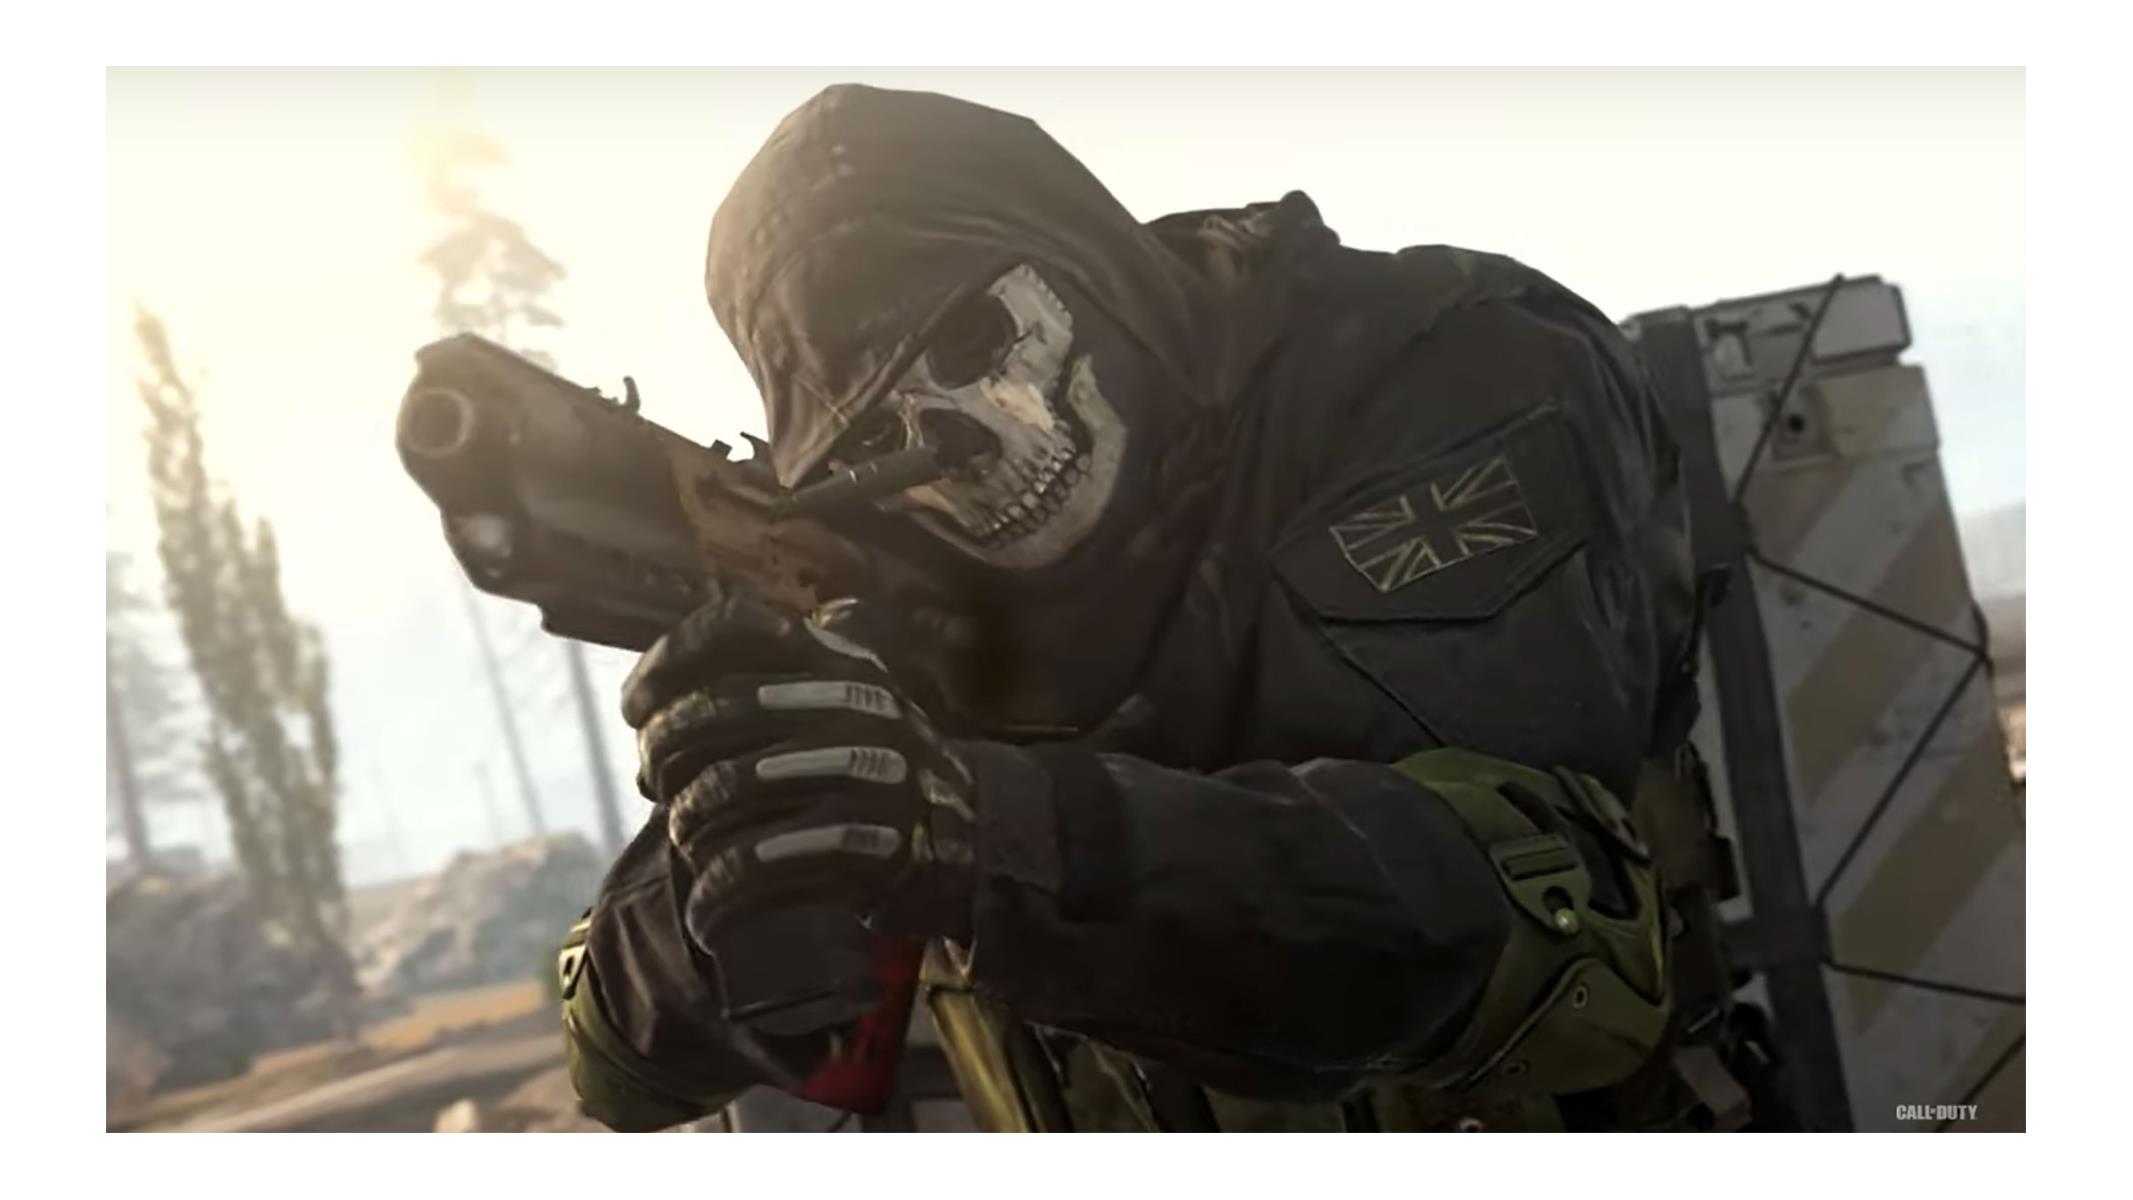 Top Call Of Duty: Warzone Tips To Survive, Thrive And Dominate